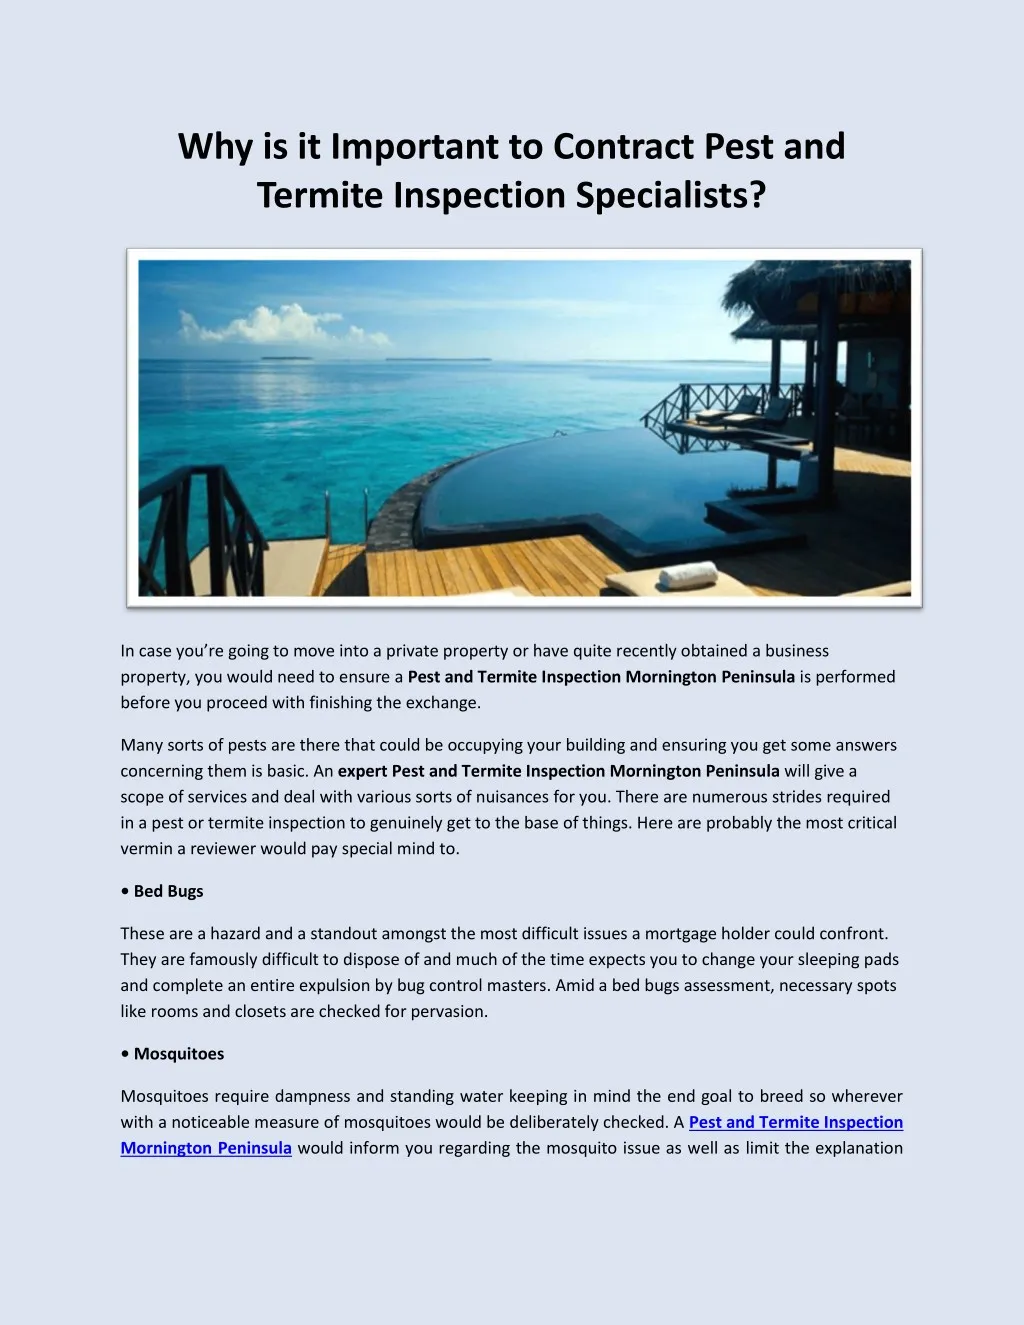 why is it important to contract pest and termite